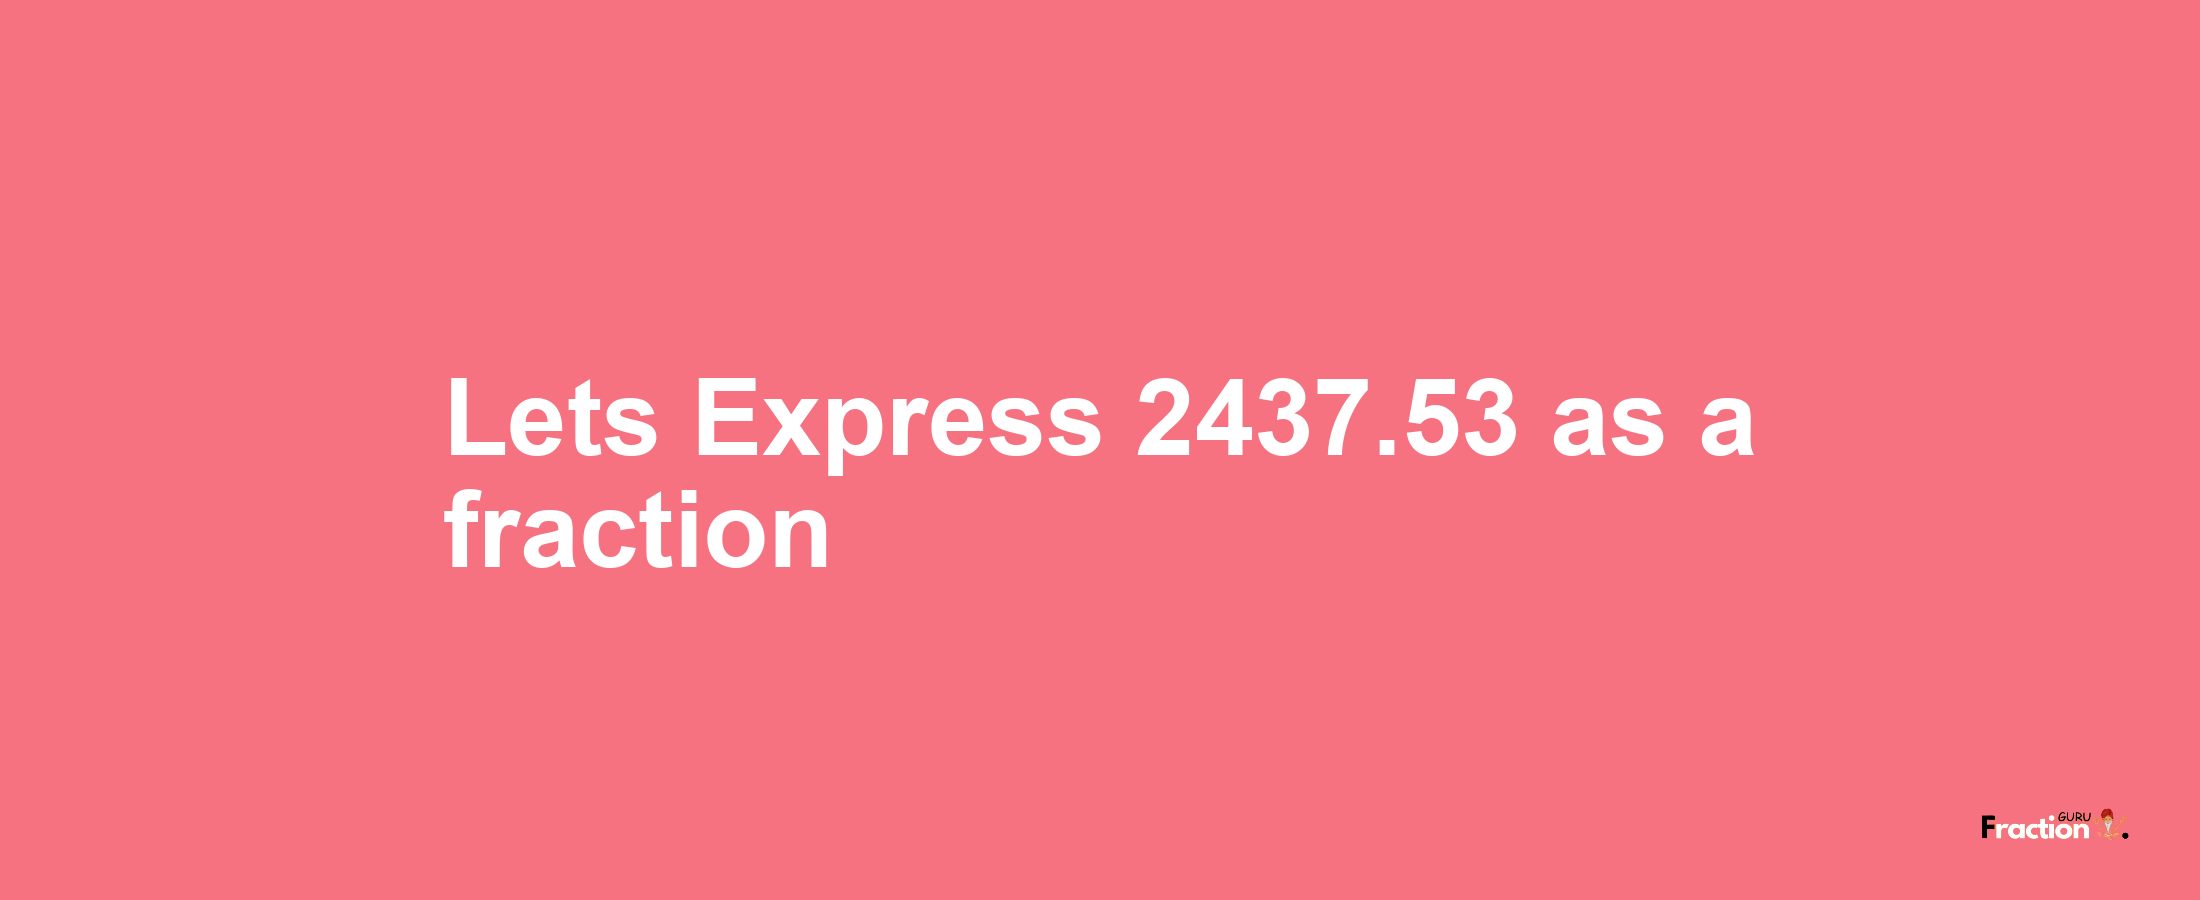 Lets Express 2437.53 as afraction